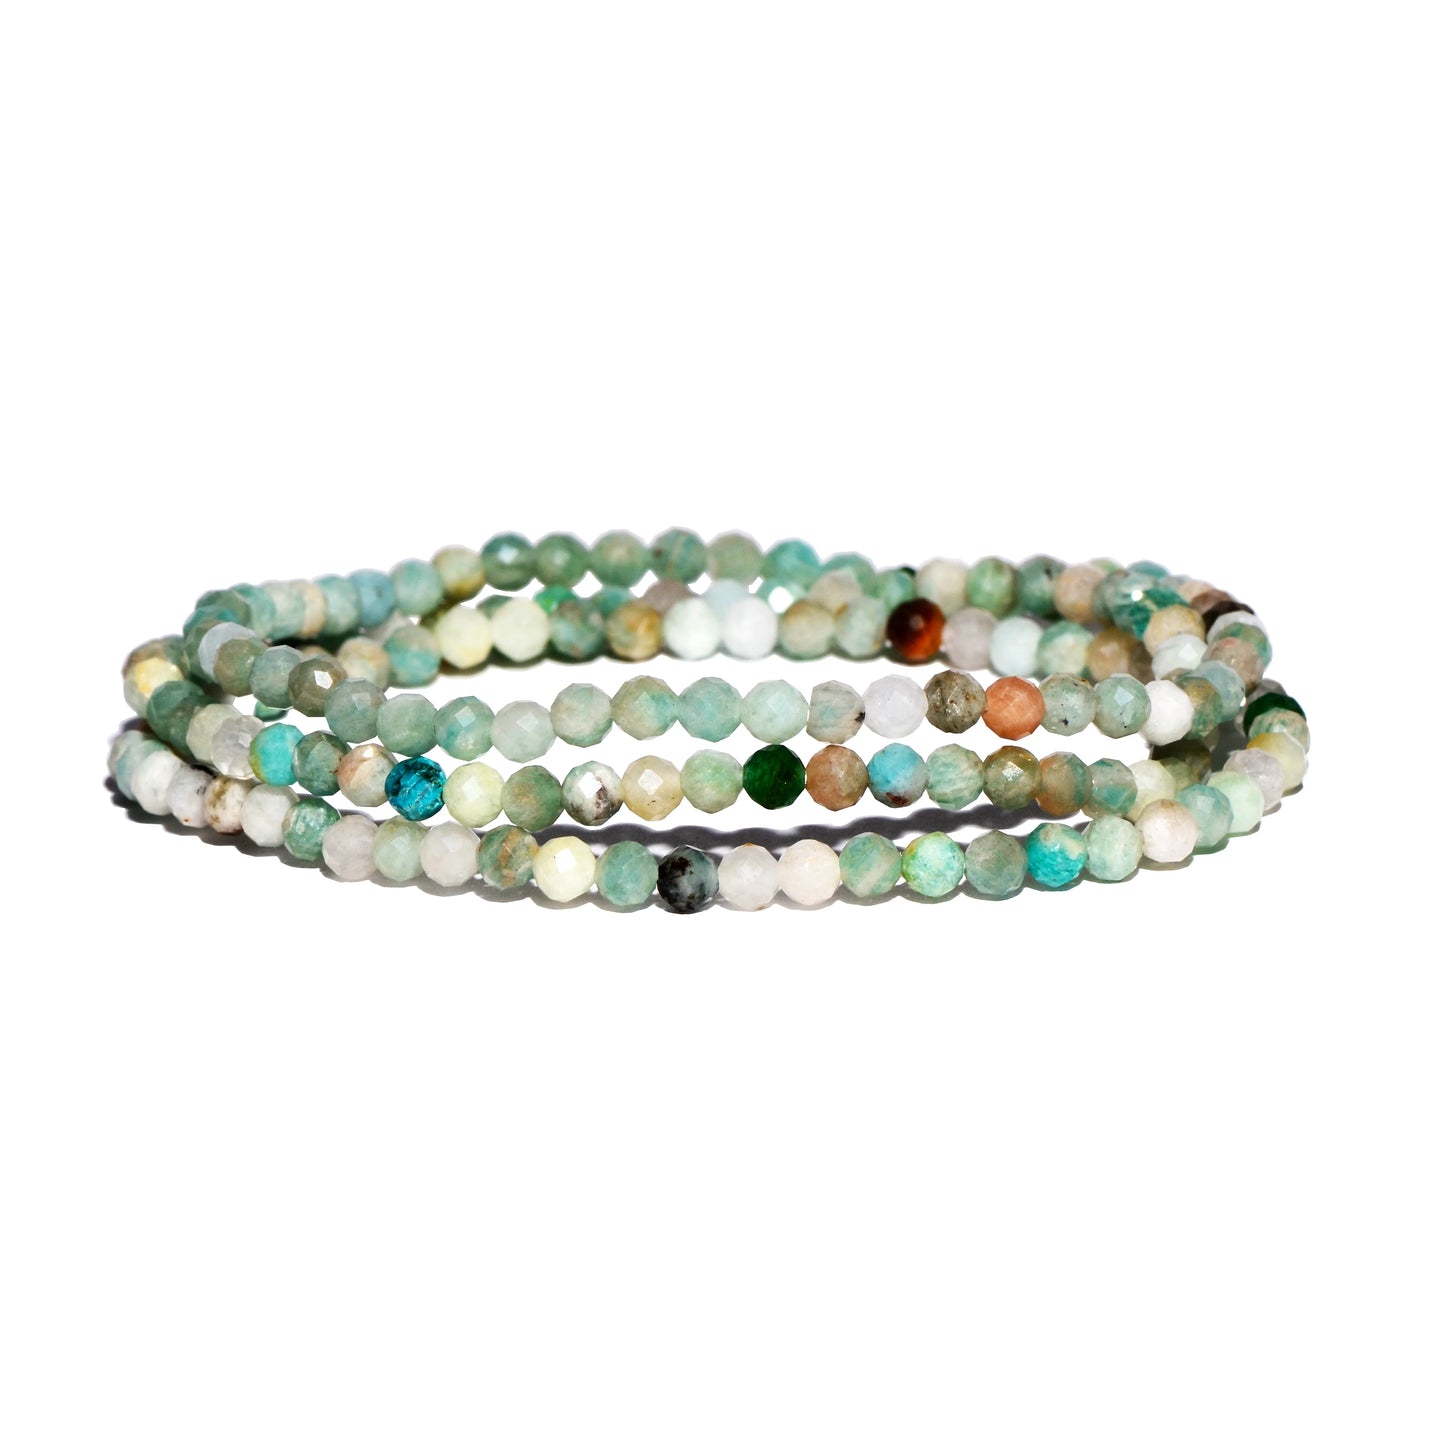 Buy Amazonite 3mm Faceted Beaded Bracelet for Peace, Harmony and Truth.